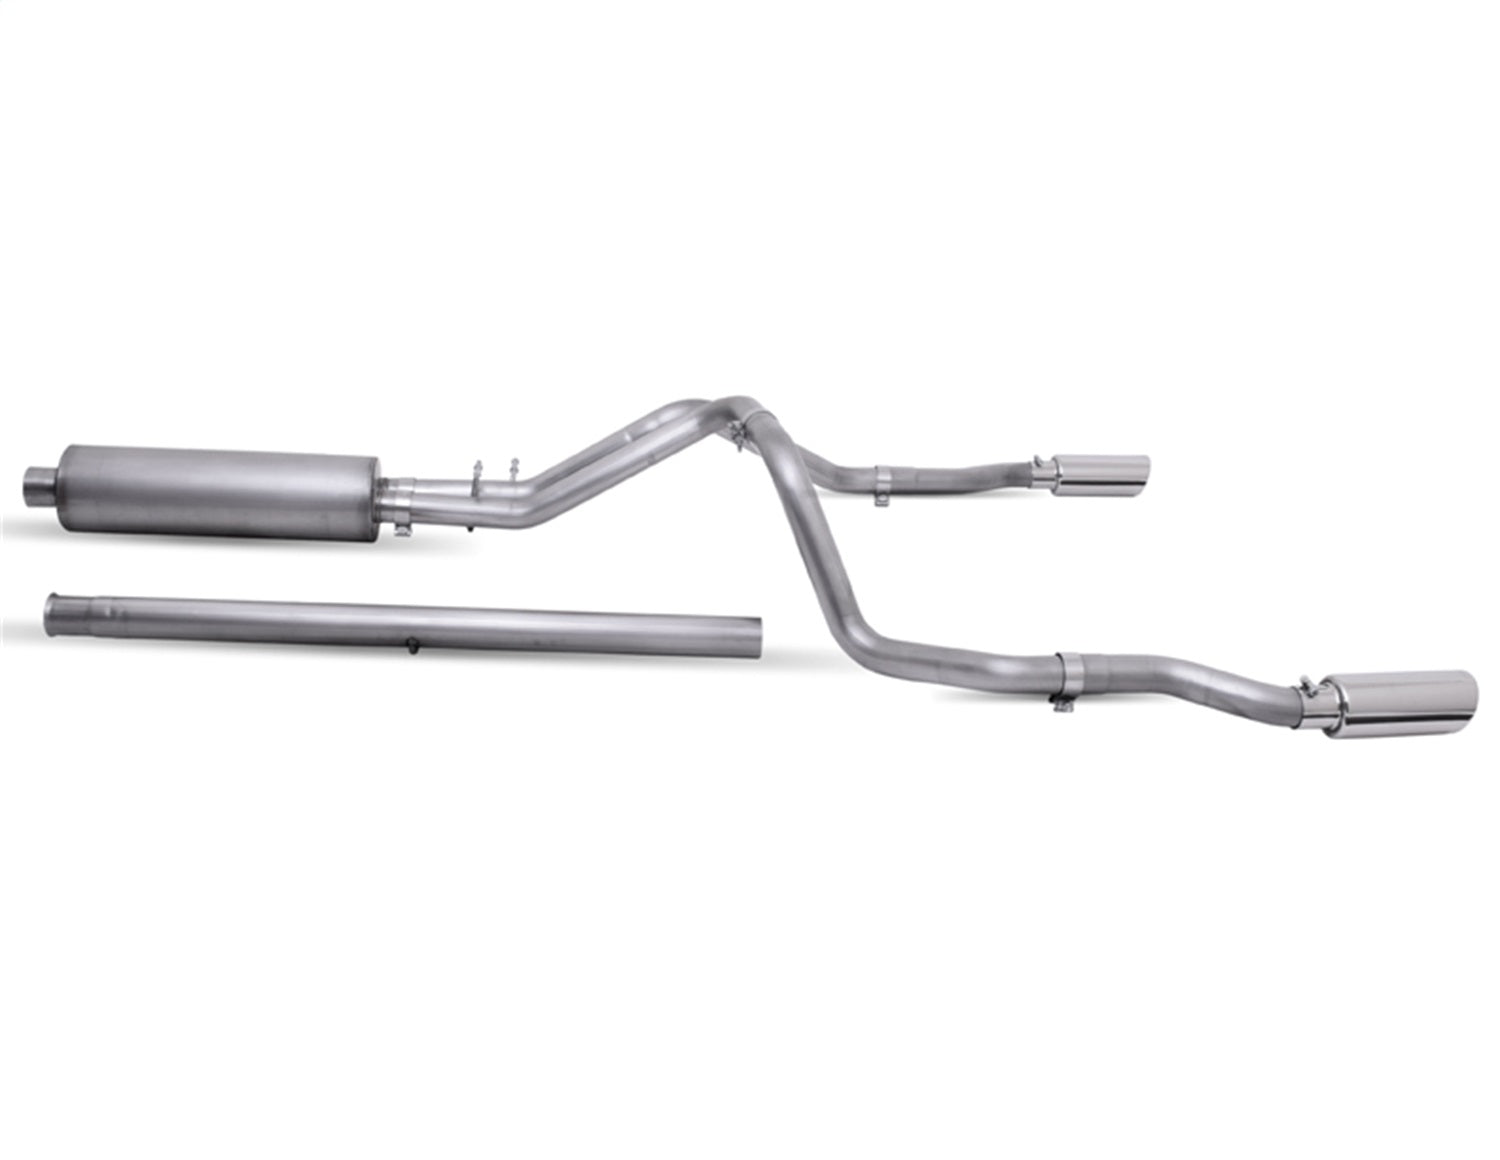 Gibson Performance 65713 Cat-Back Dual Split Exhaust System